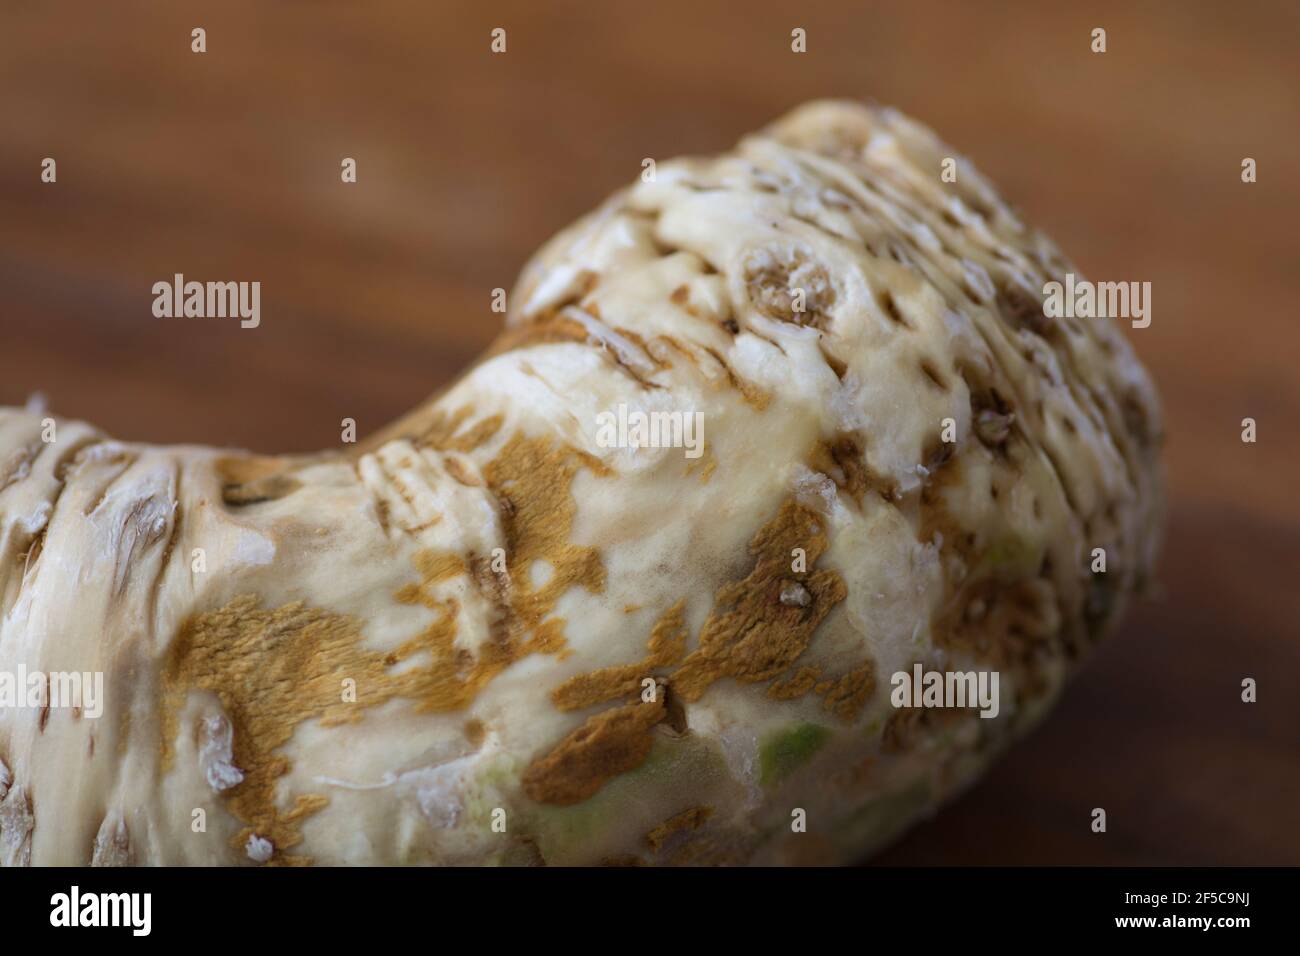 Close up of an Horseradish (Armoracia rusticana, syn. Cochlearia armoracia) root vegetable, cultivated and used worldwide as a spice and as a condimen Stock Photo